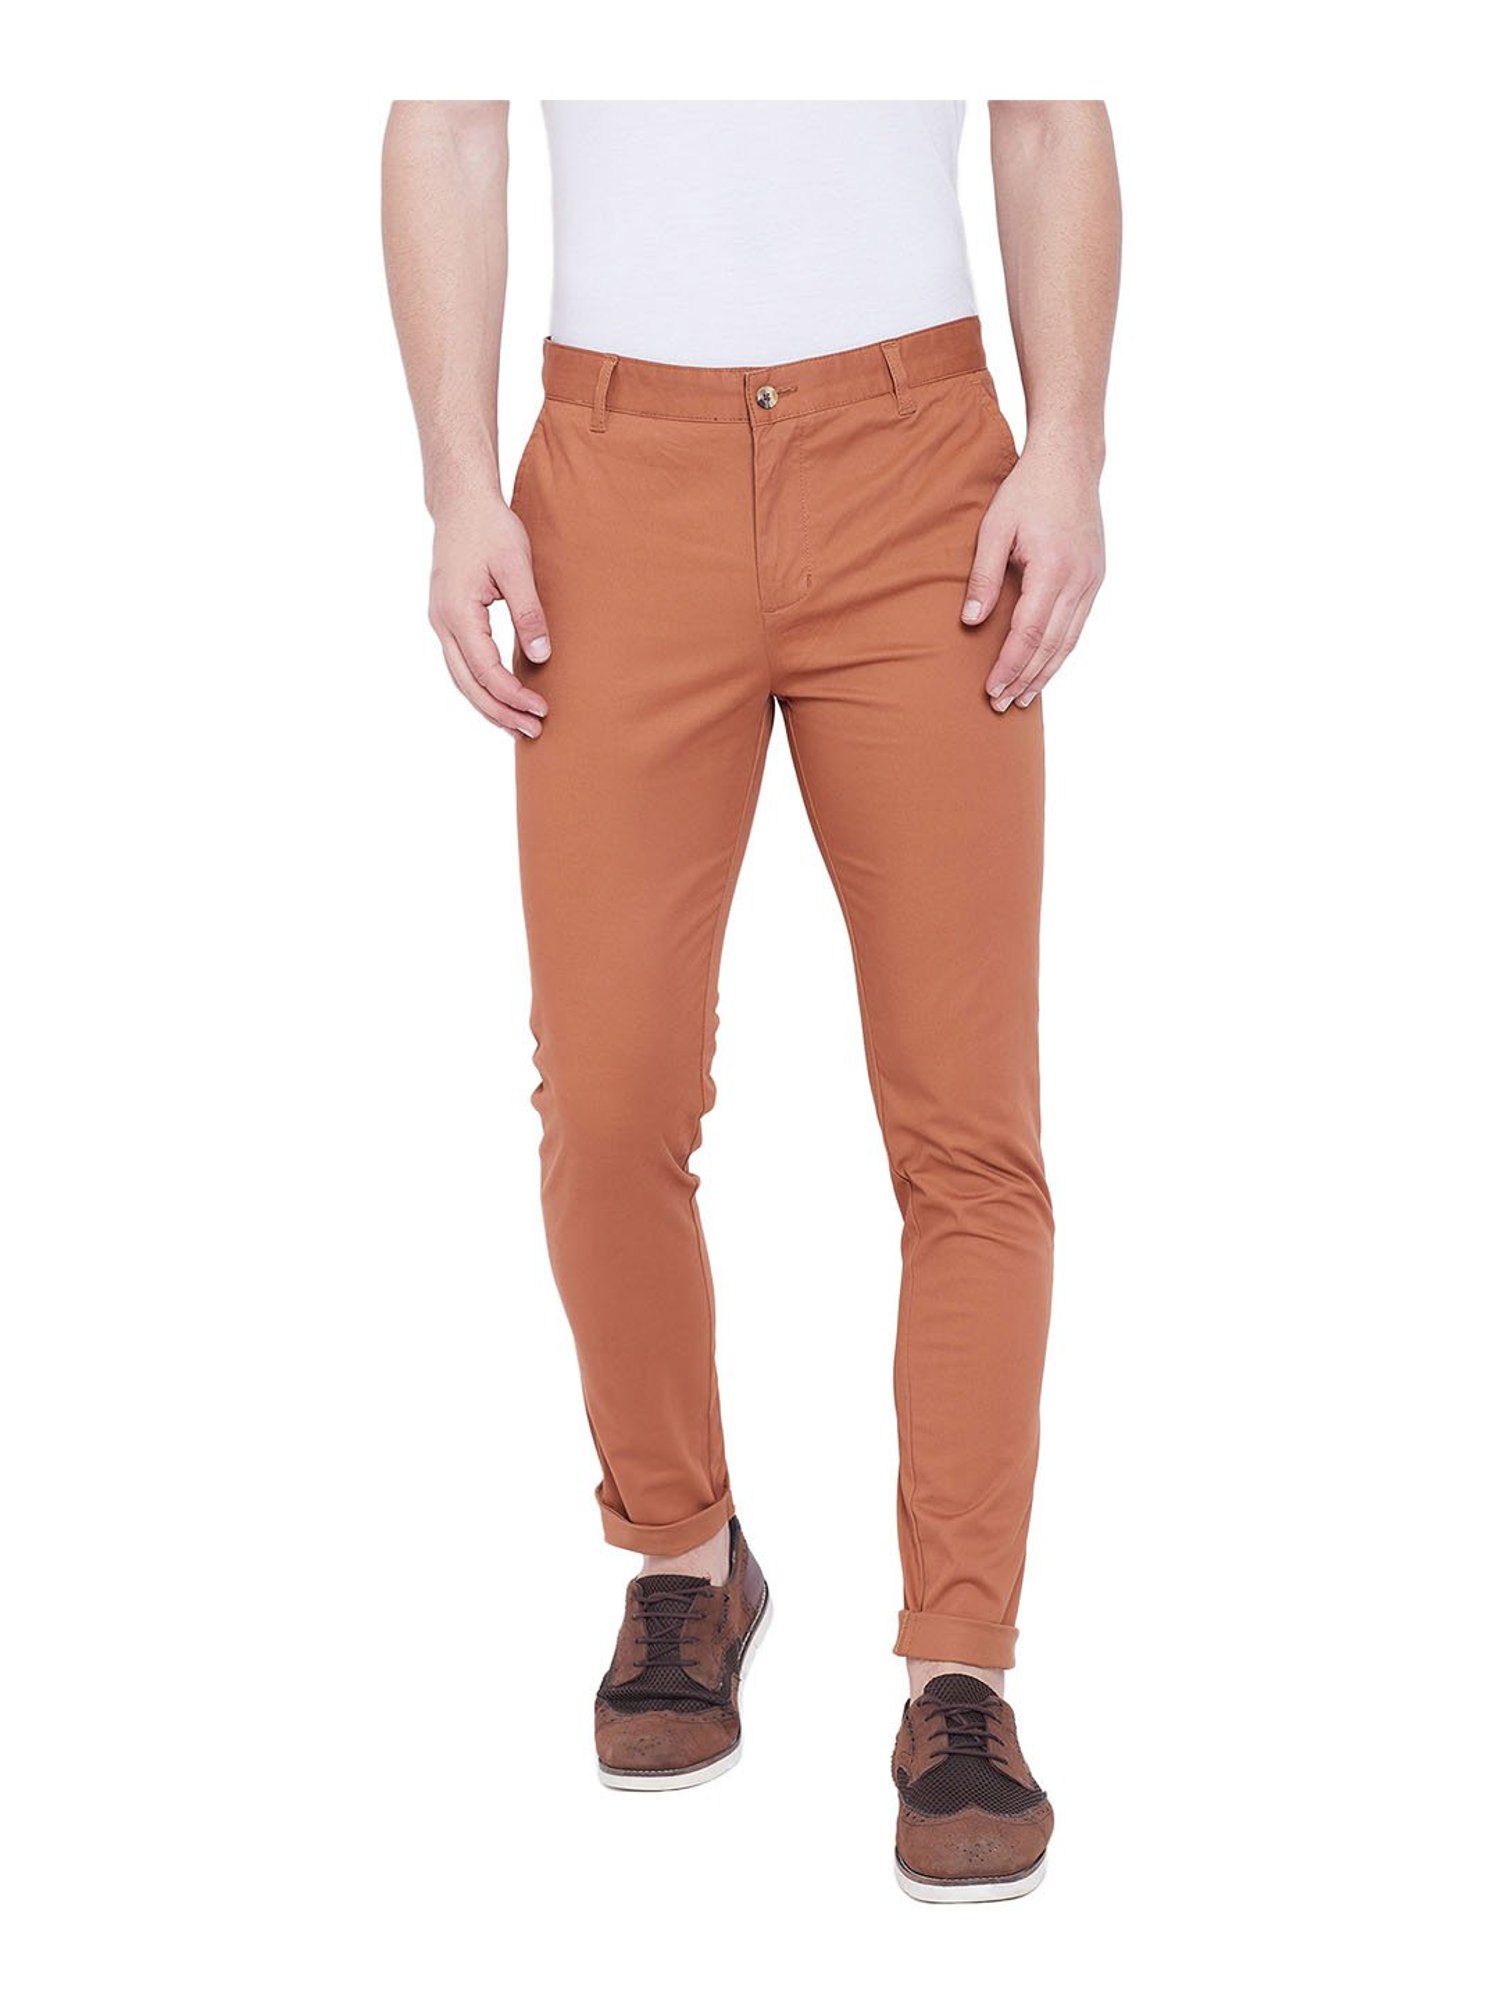 Grey Slim Fit Flat Front Trousers  Buy Grey Slim Fit Flat Front Trousers  online in India